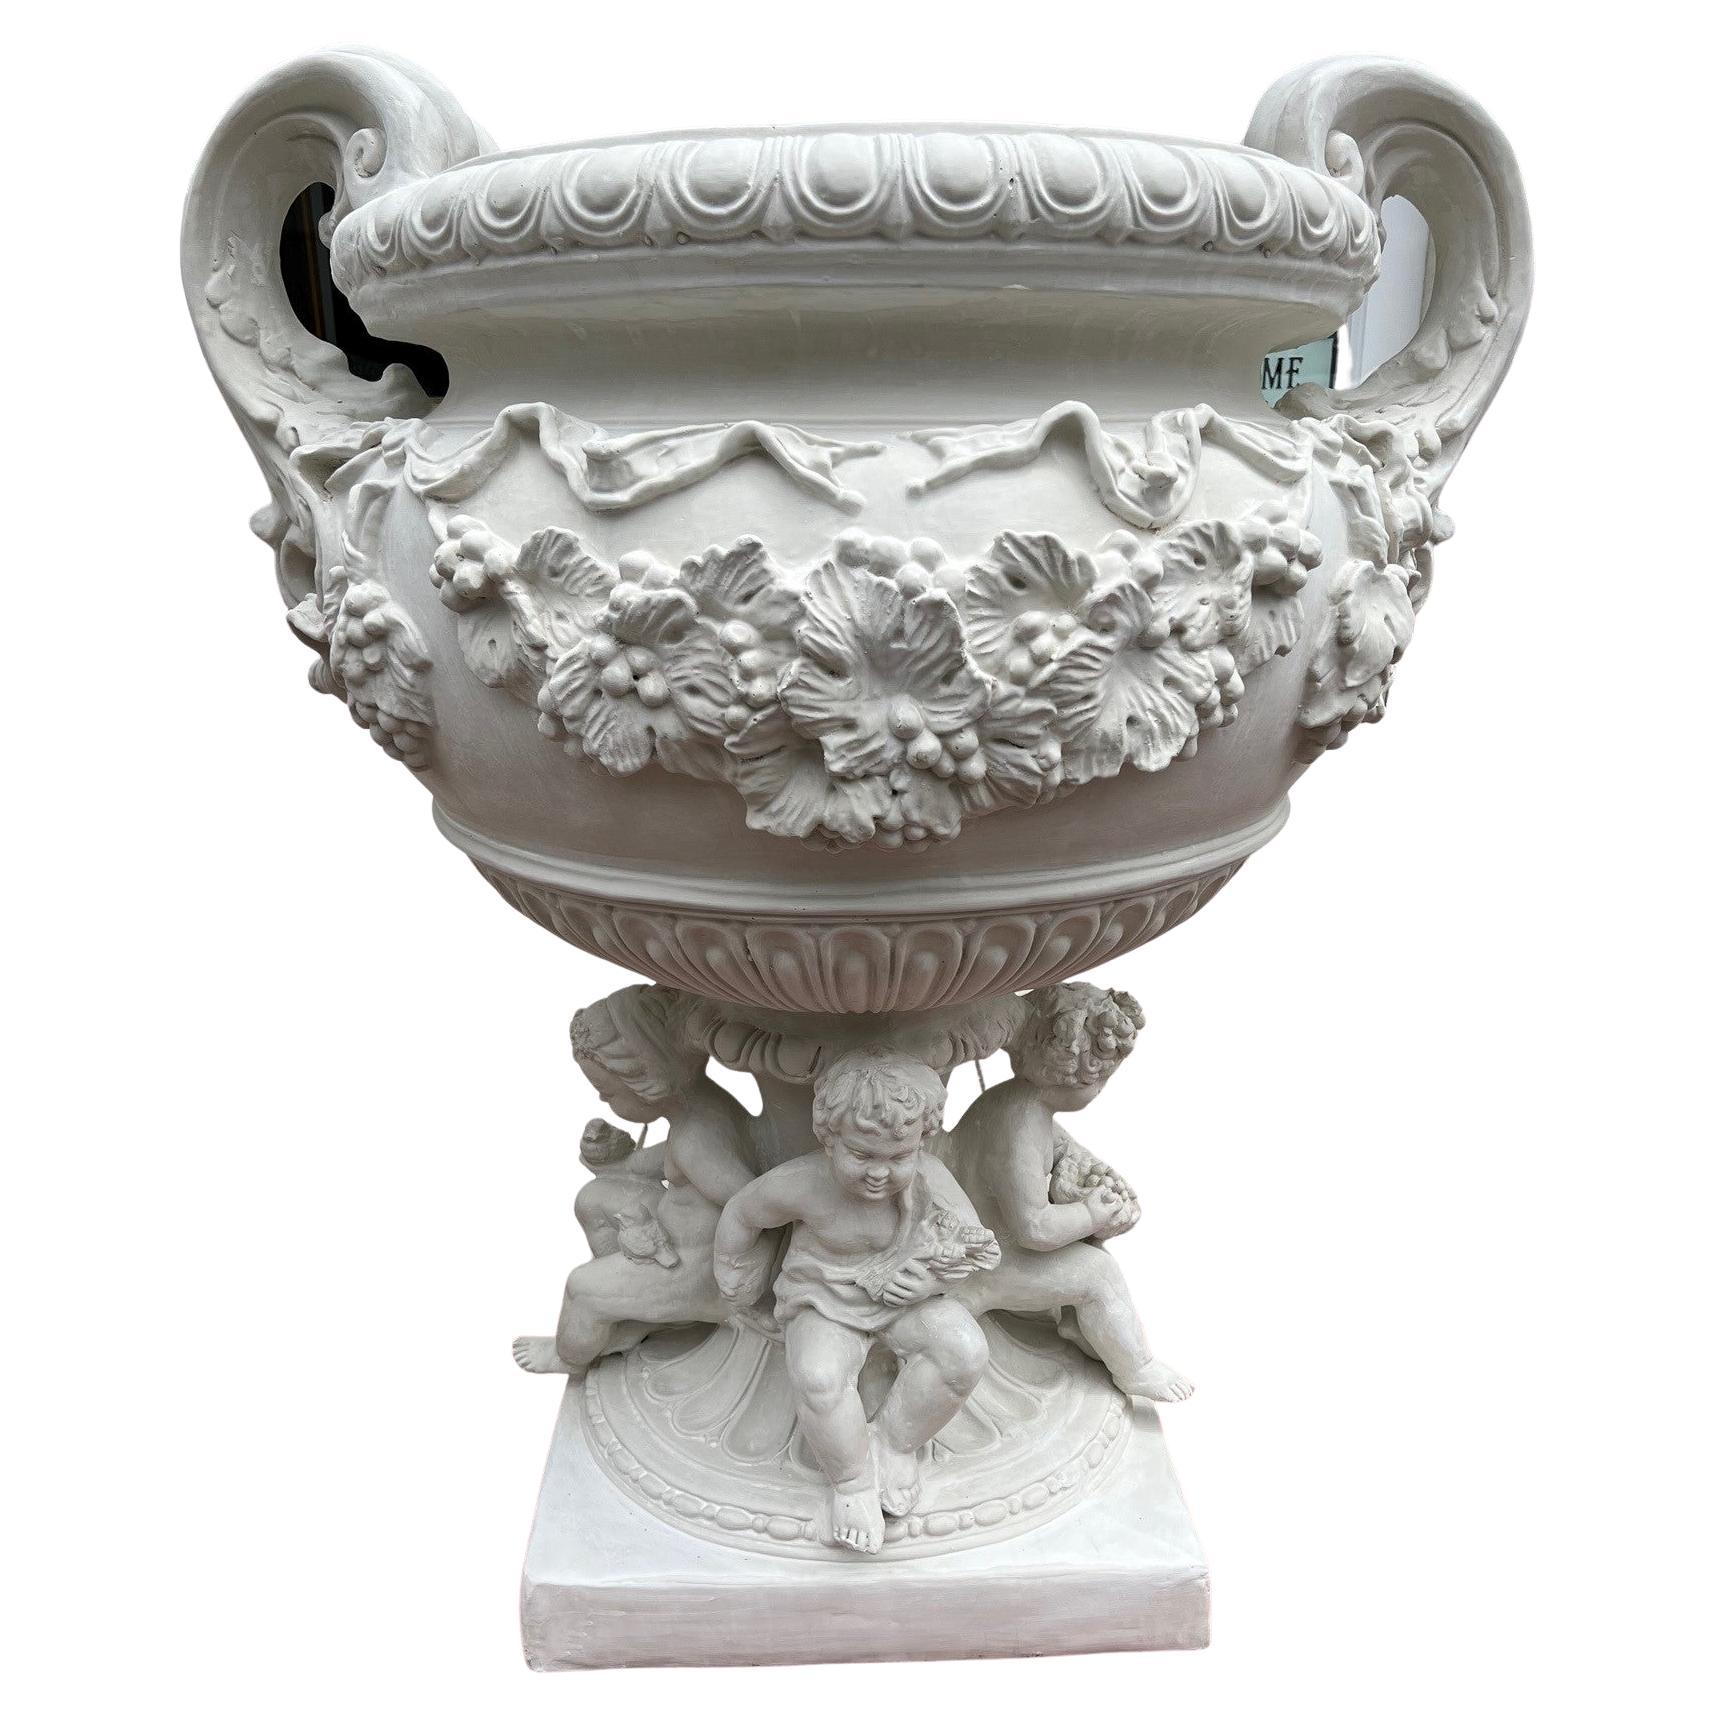 Reproduction White Fiberglass Urn with Large Handles Grape Vines and Cherubs  